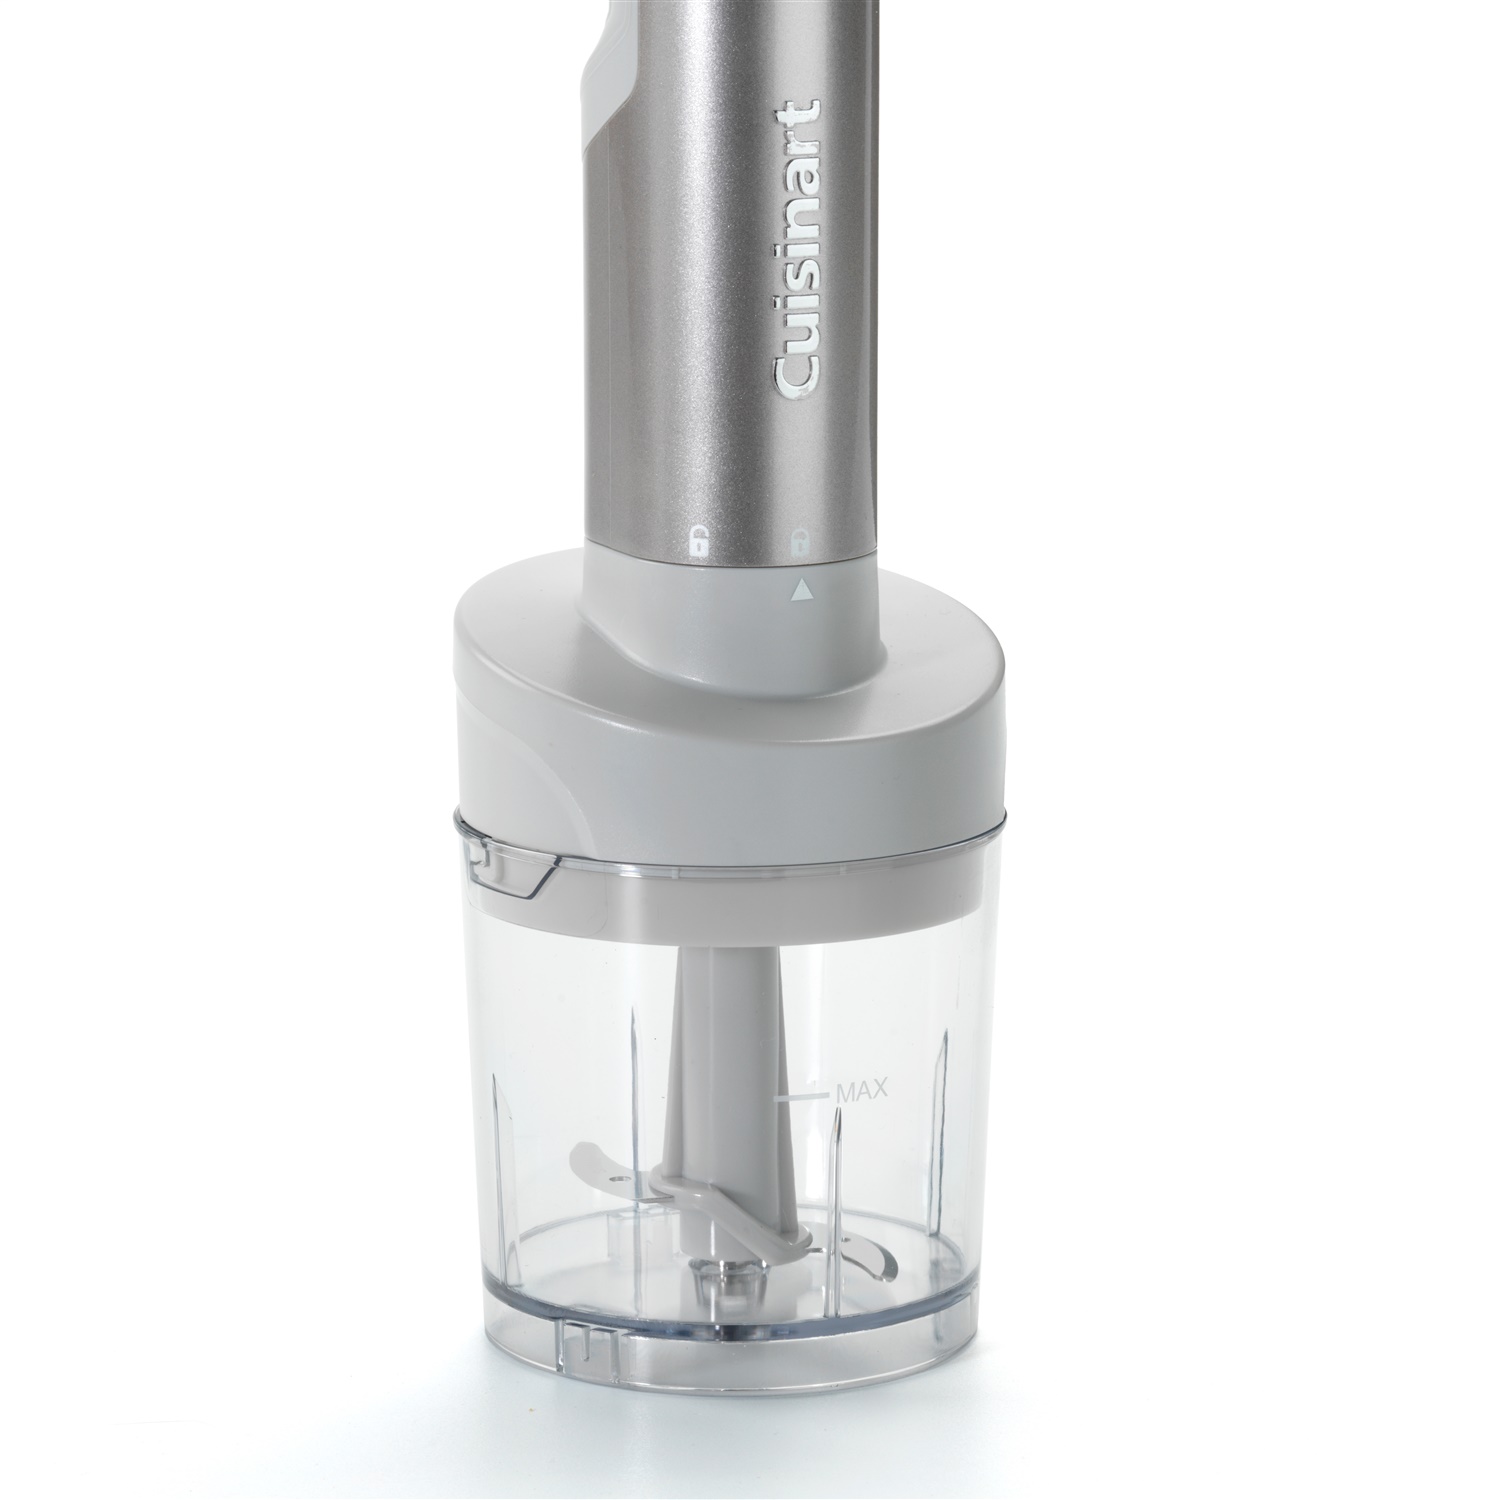 Cuisinart Cordless Pro Hand Blender and Mini Chopper, Rechargeable